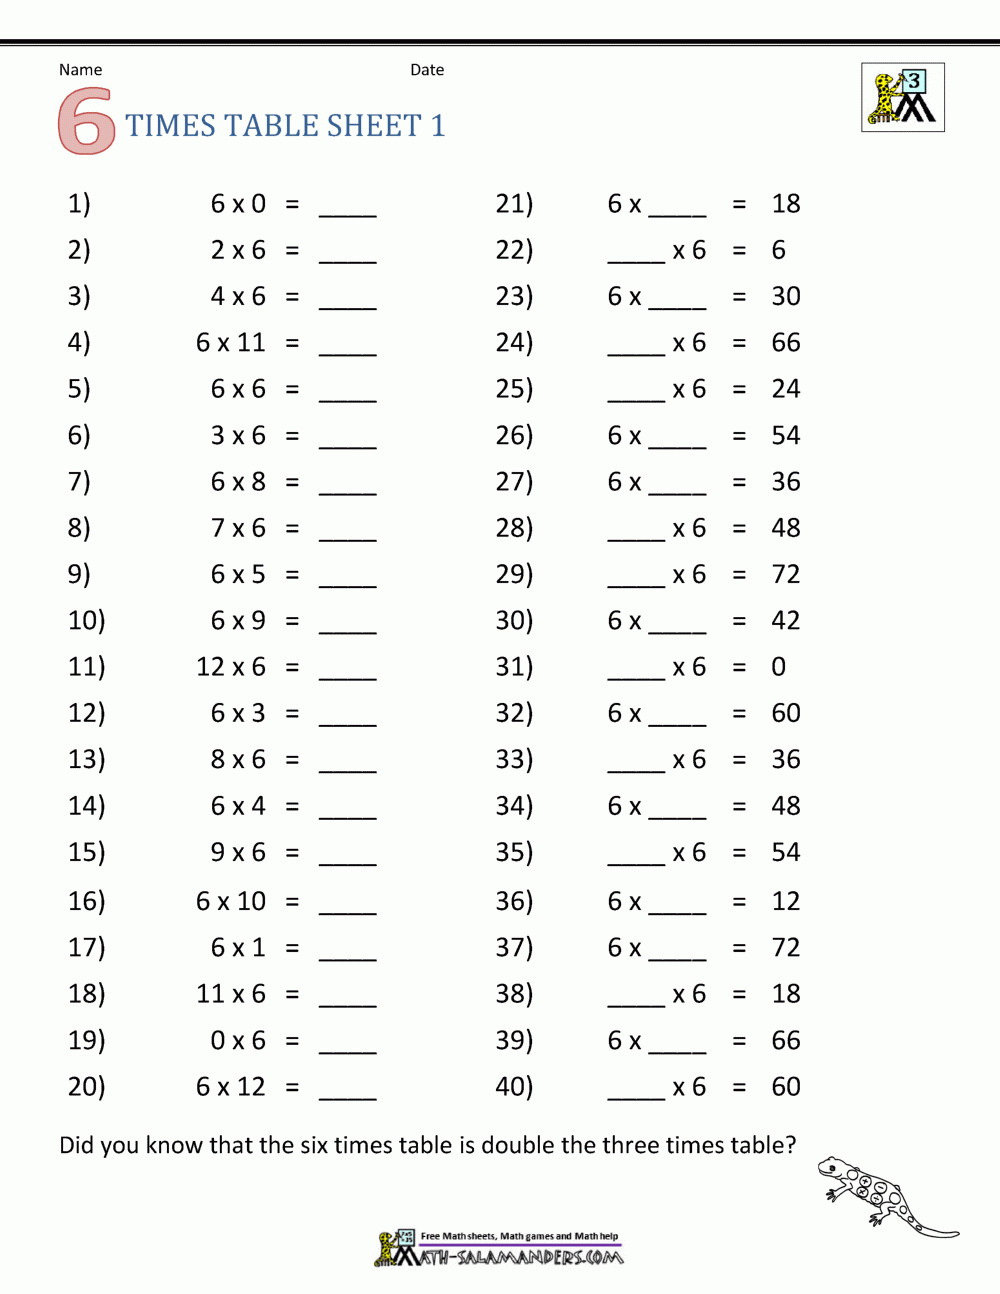 Multiplication Drill Sheets 3Rd Grade within 6 Multiplication Printable